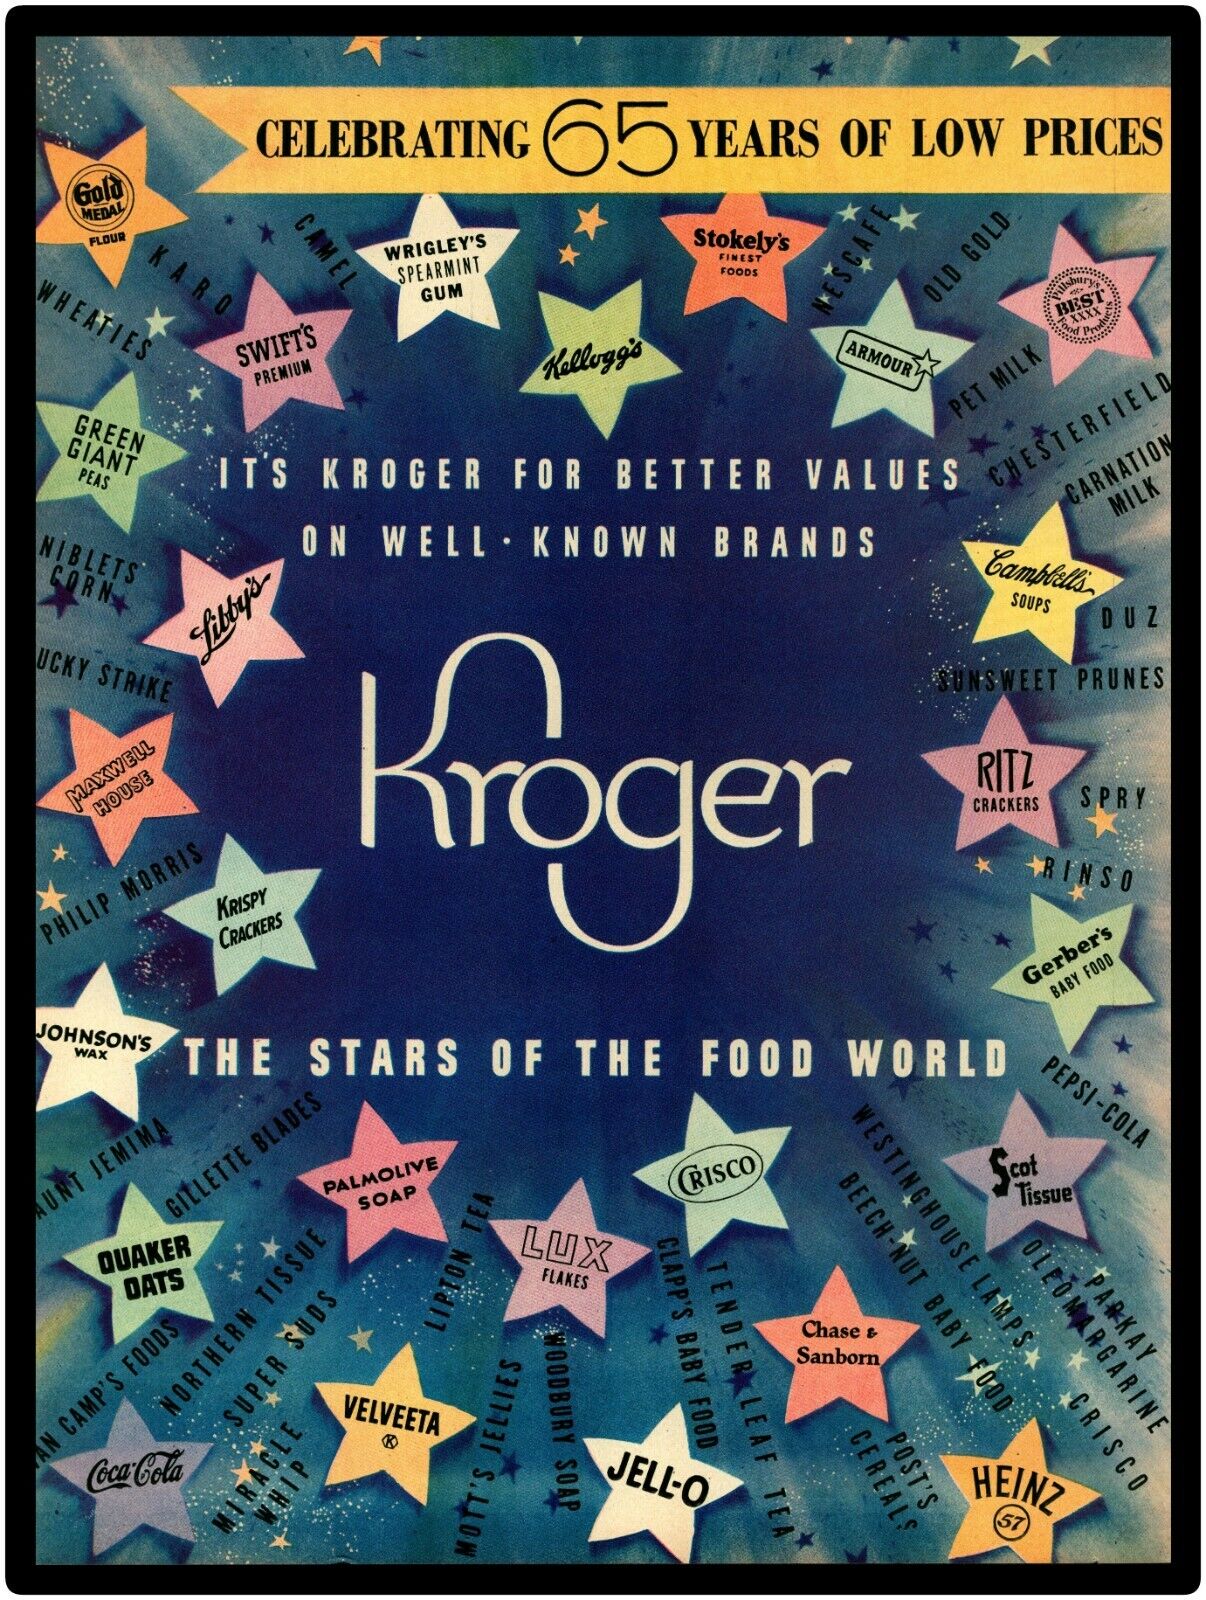 Kroger Grocery Stores 65th Anniversary New Metal Sign: LARGE SIZE 12 X 16     